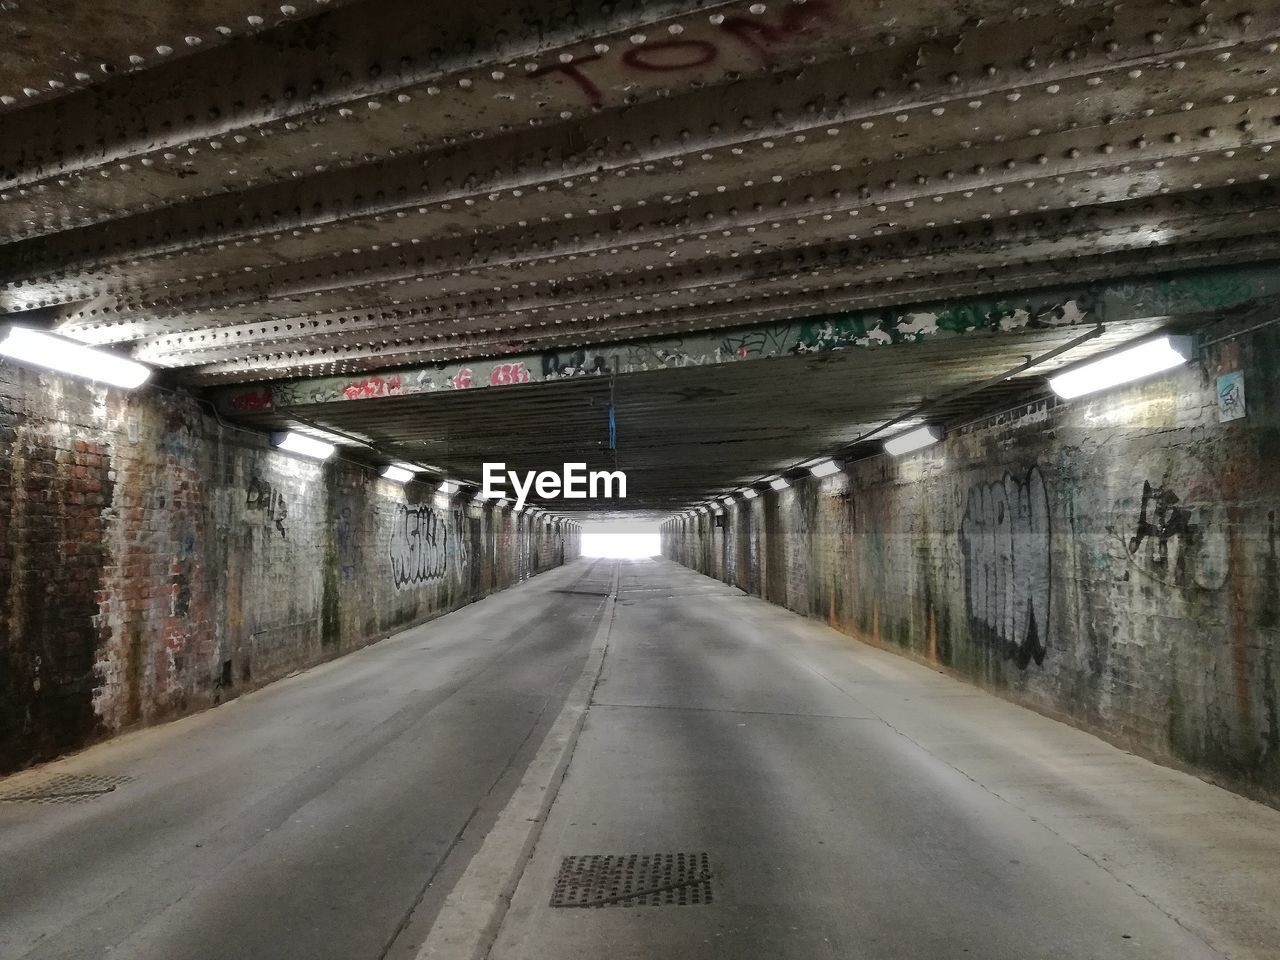 VIEW OF EMPTY TUNNEL